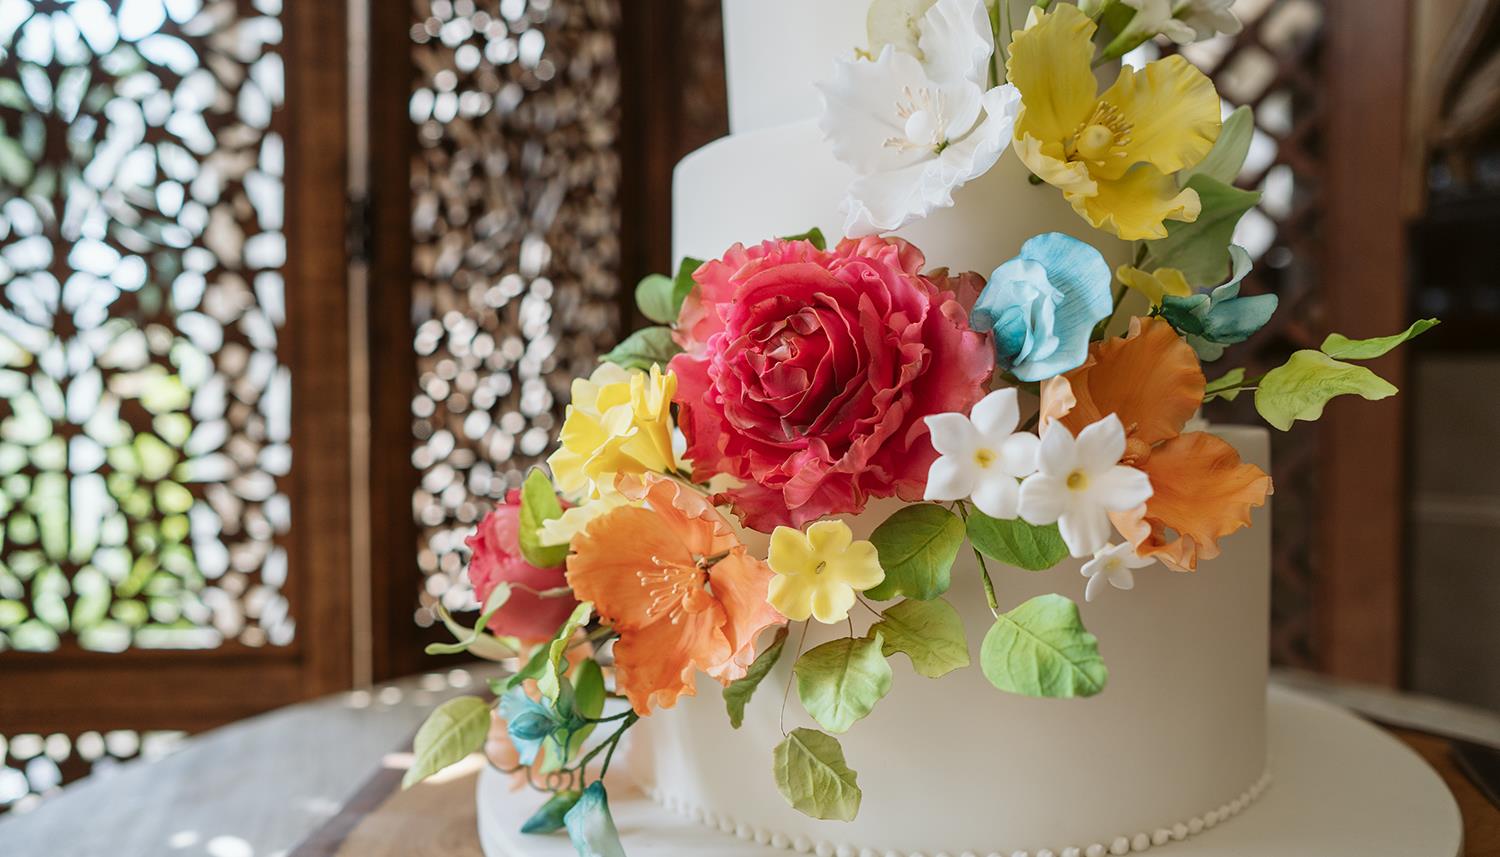 Floral cake. Photo Credit: Lee Dann Photography